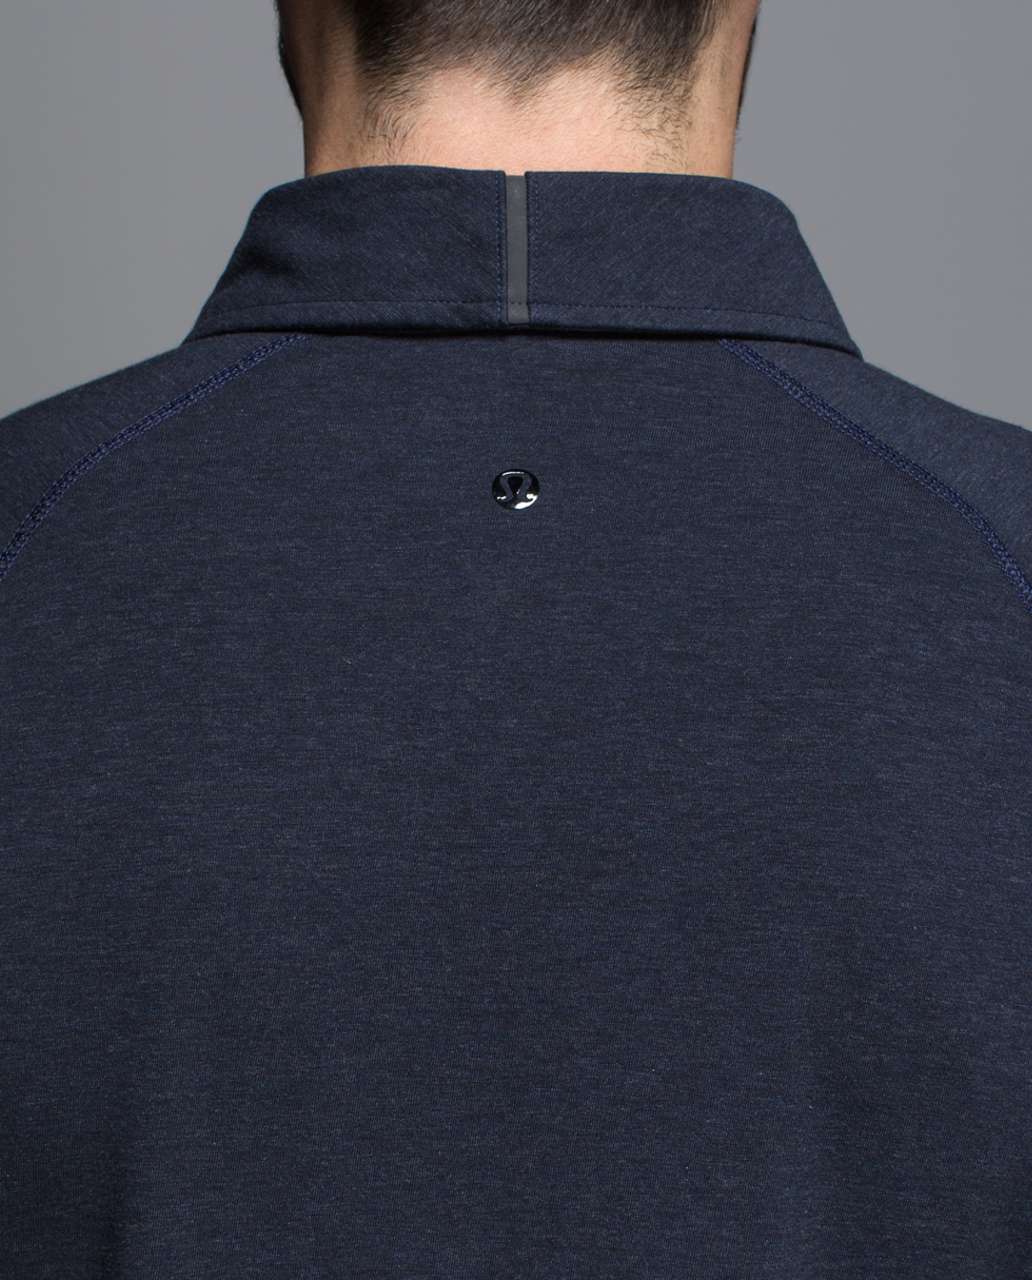 Lululemon Rival Button Up - Heathered Inkwell